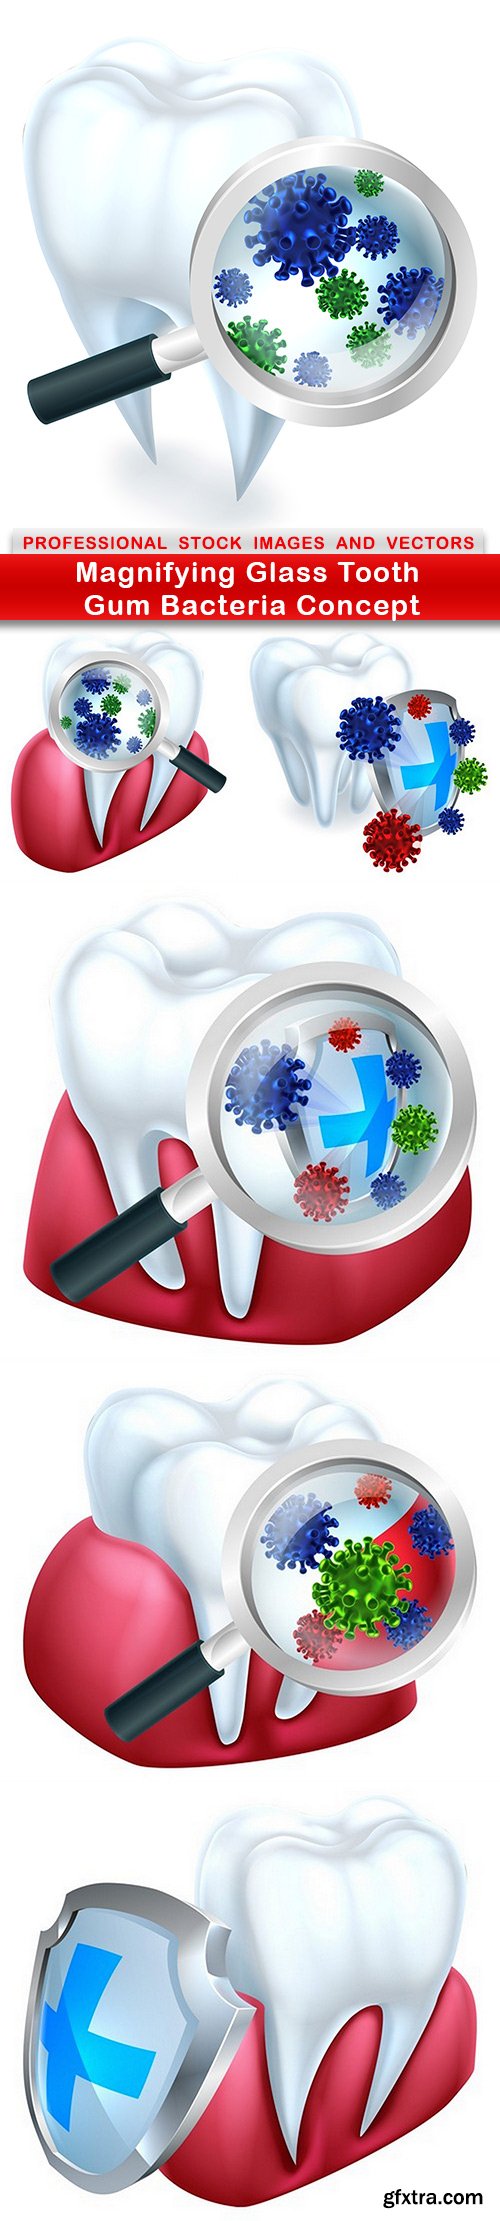 Magnifying Glass Tooth Gum Bacteria Concept - 6 EPS